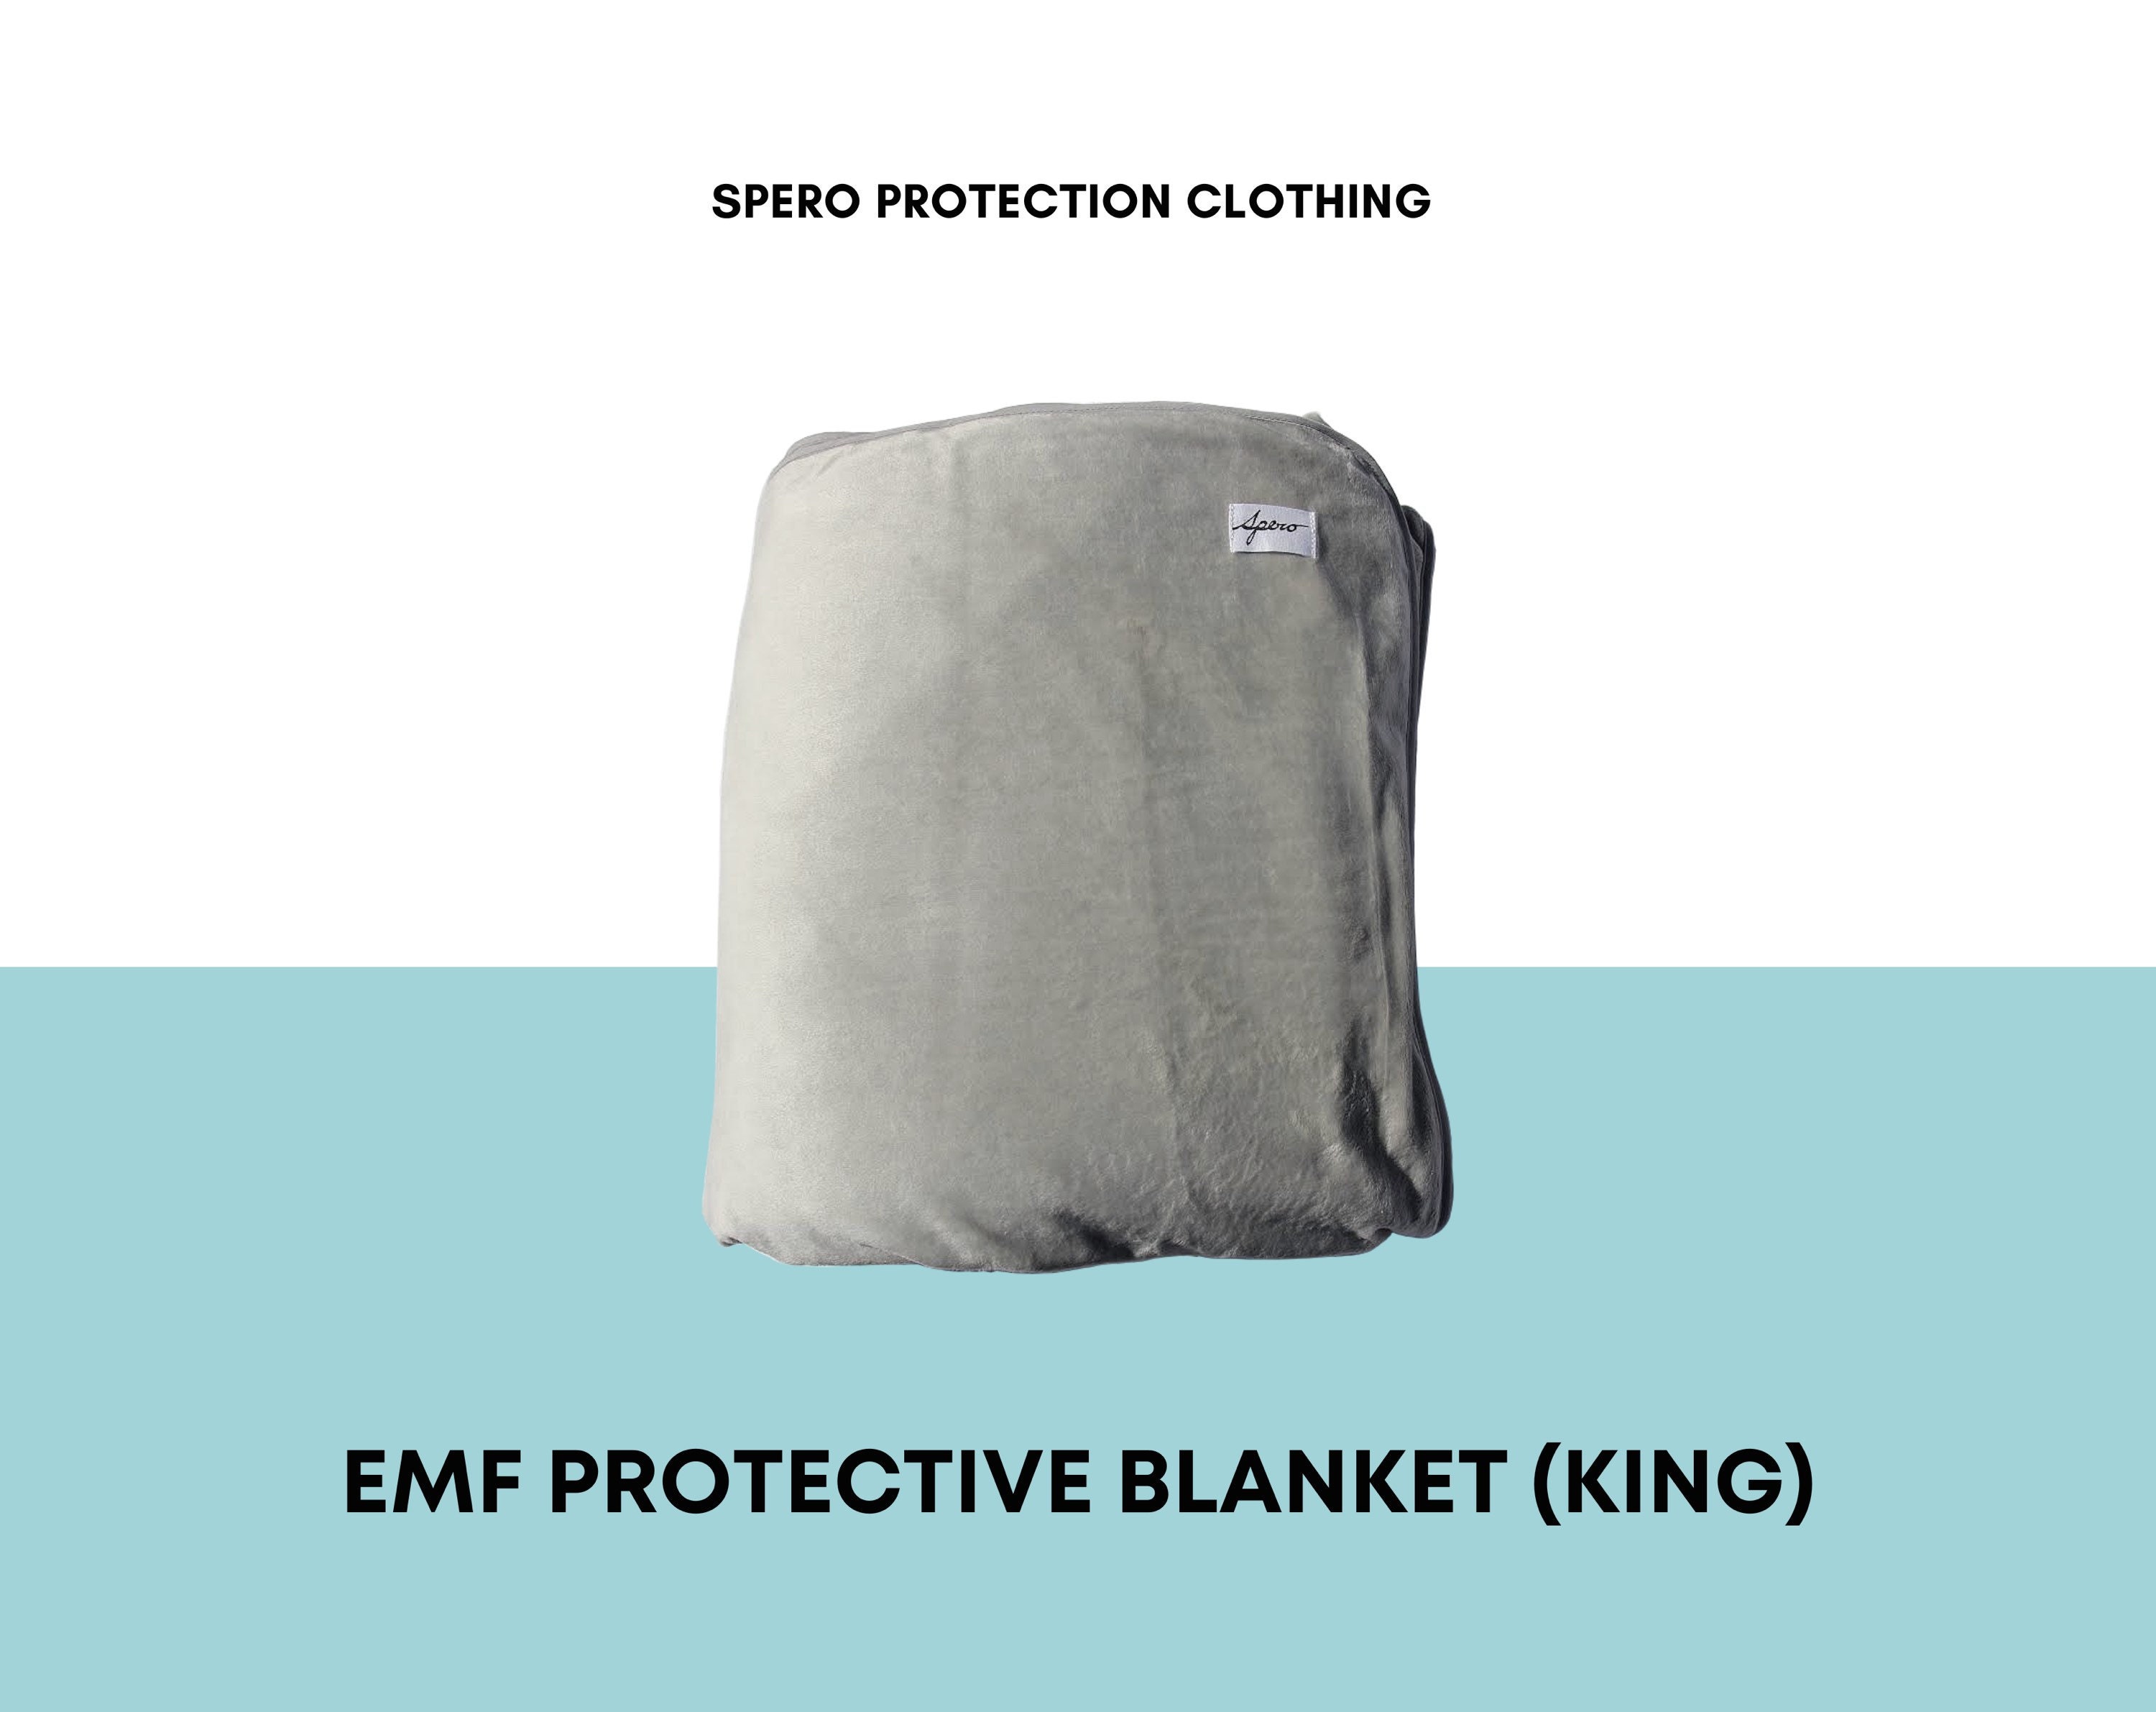 Spero EMF Protection Clothing (@sperogear) • Instagram photos and videos